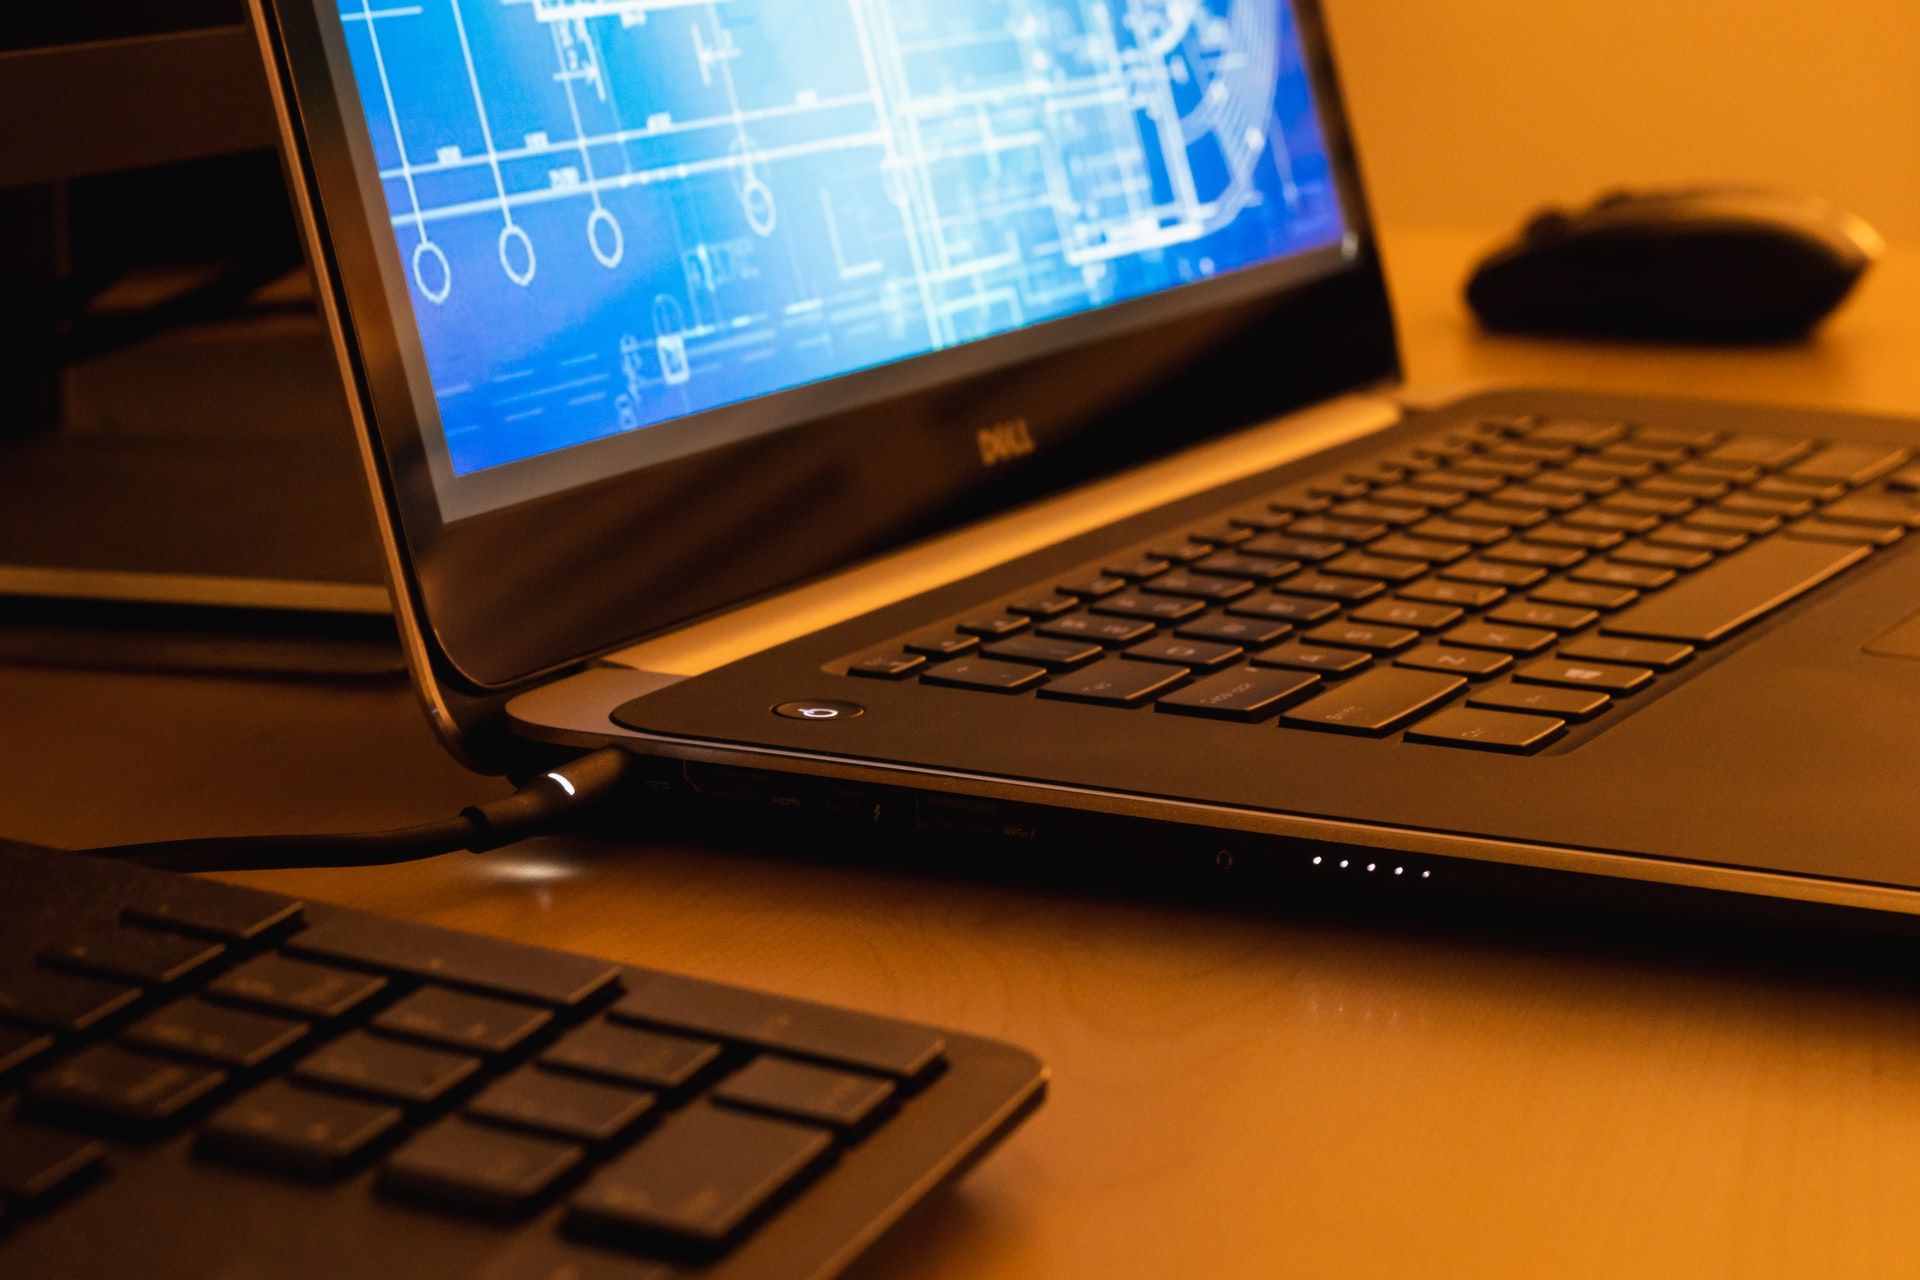 Image of a Dell laptop running product design software